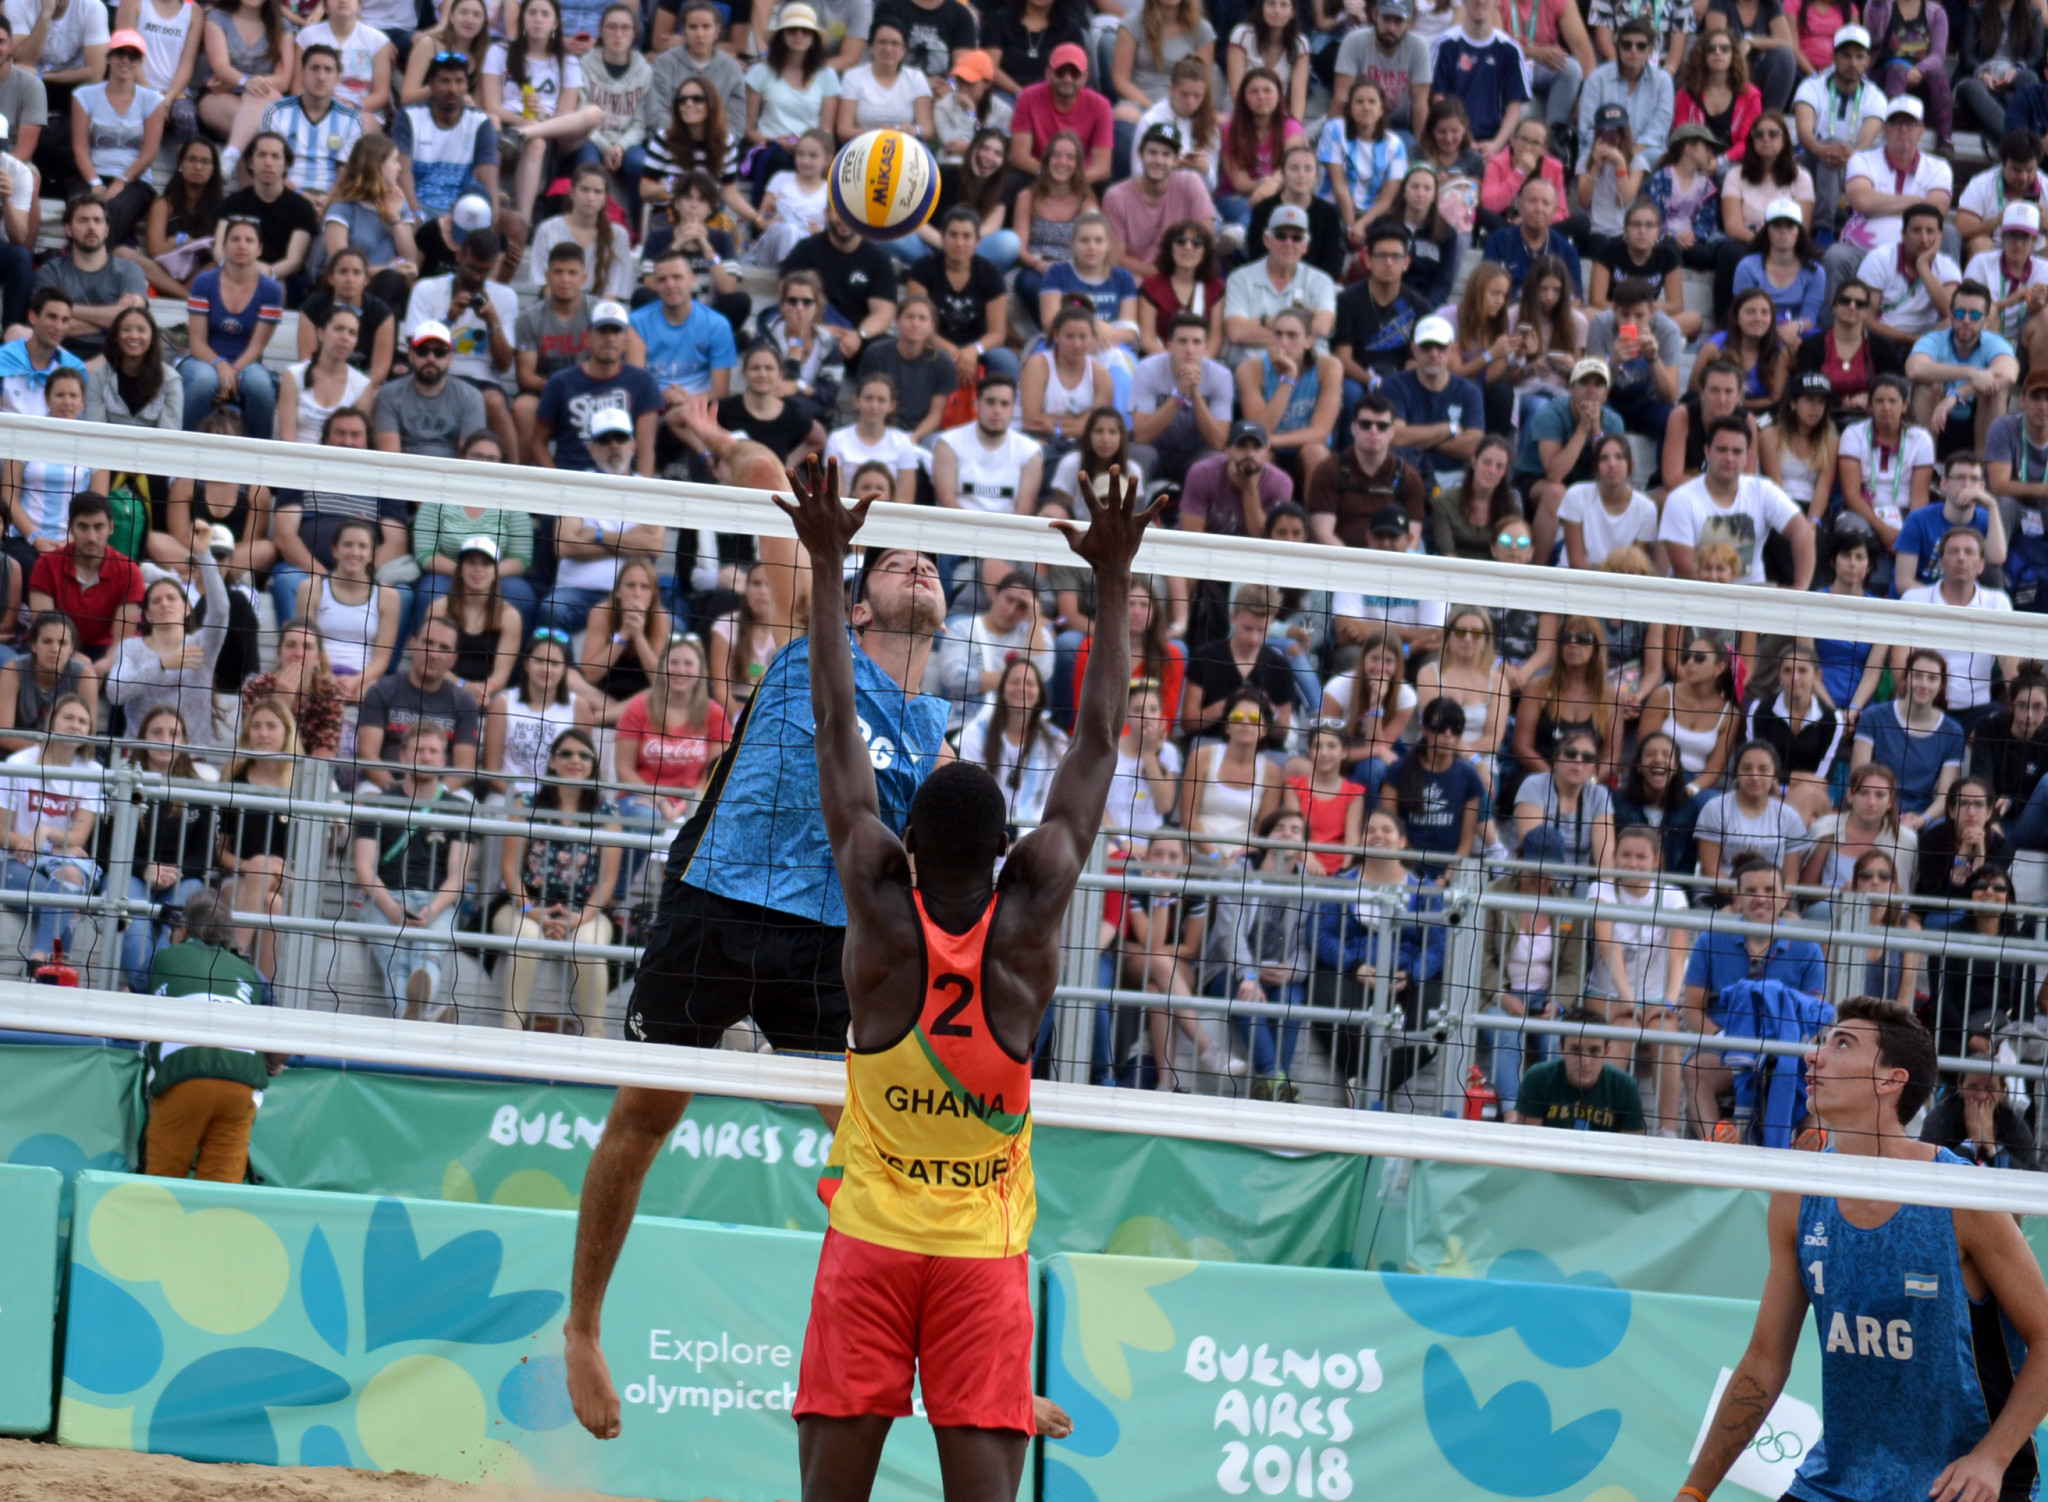 Bautista Amieva, pictured helping the home team win bronze in last year's Youth Olympic Games in Buenos Aires, will be giving his all again at a home venue when the FIVB Snow Volleyball World Tour event starts in Bariloche ©FIVB